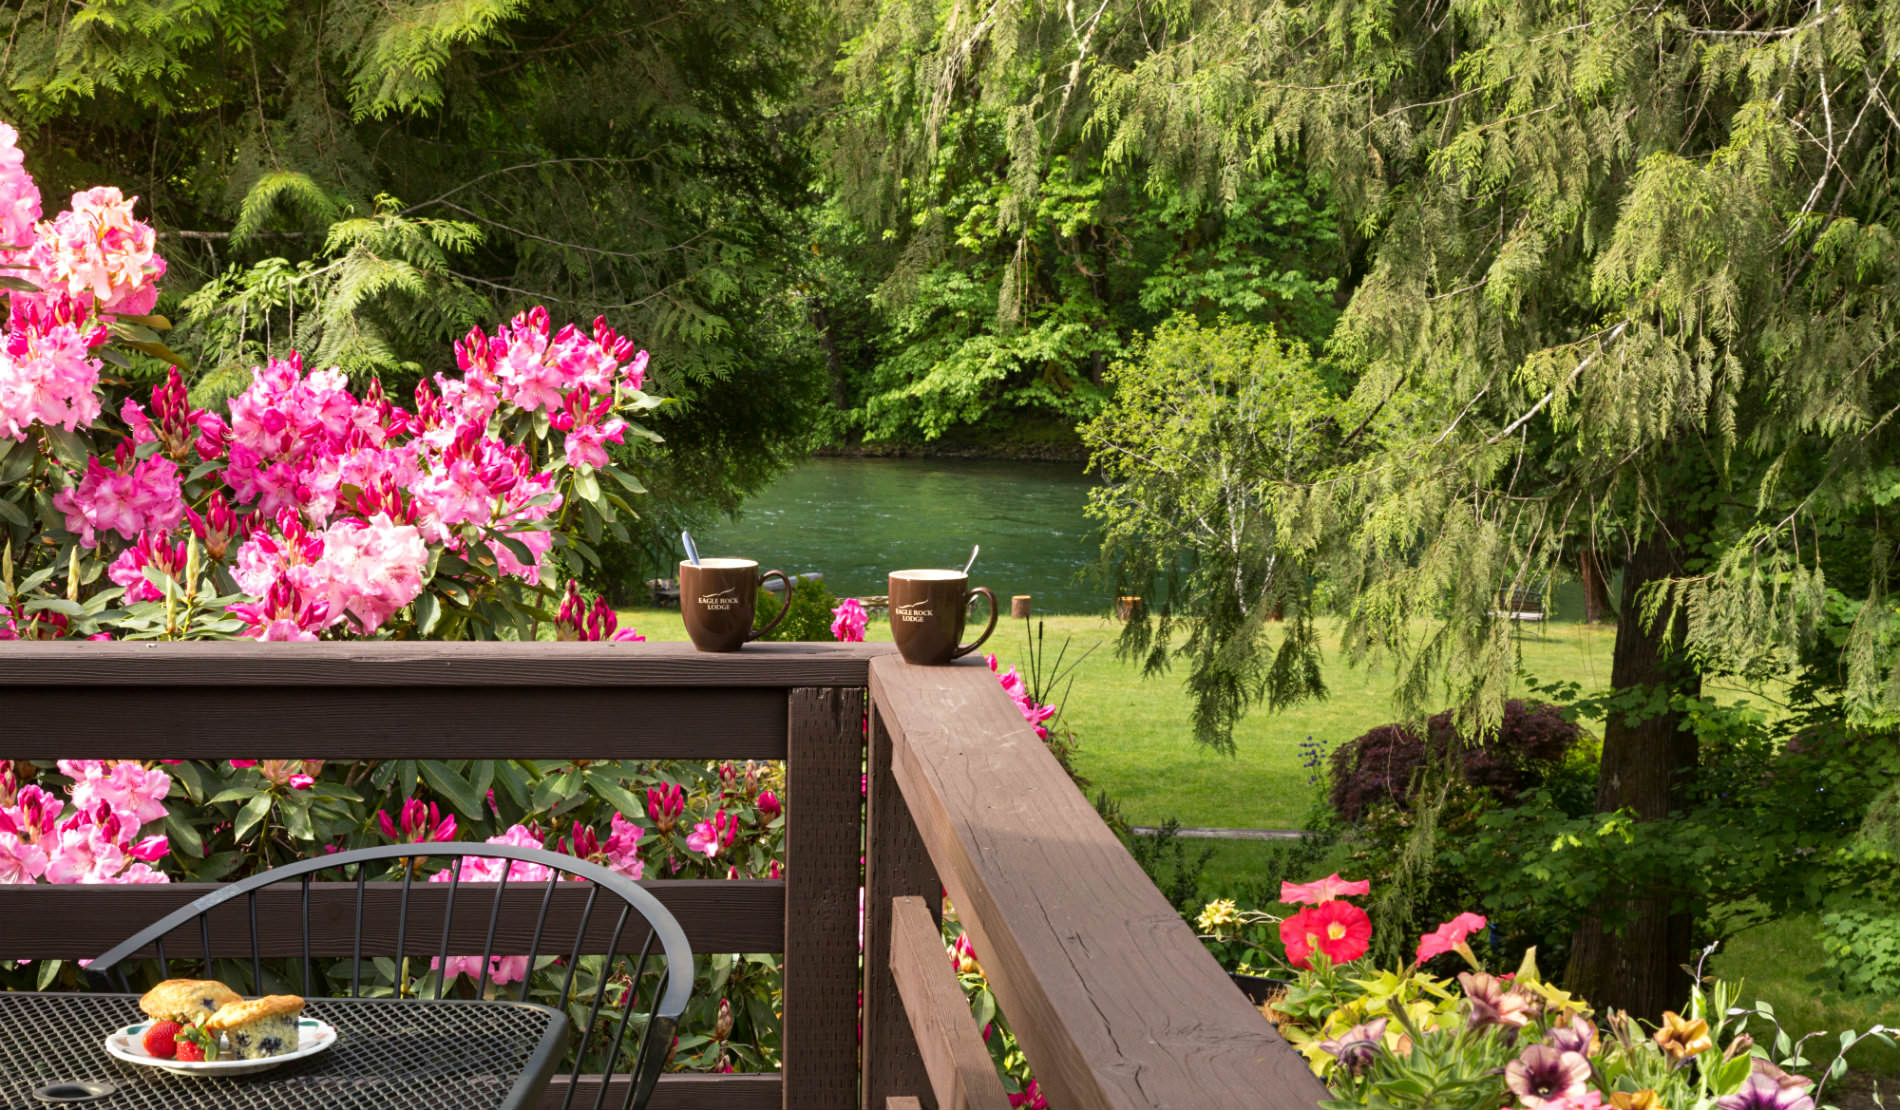 Corner of wooden deck with coffee mugs on ledge, pink flowers and green trees in background.